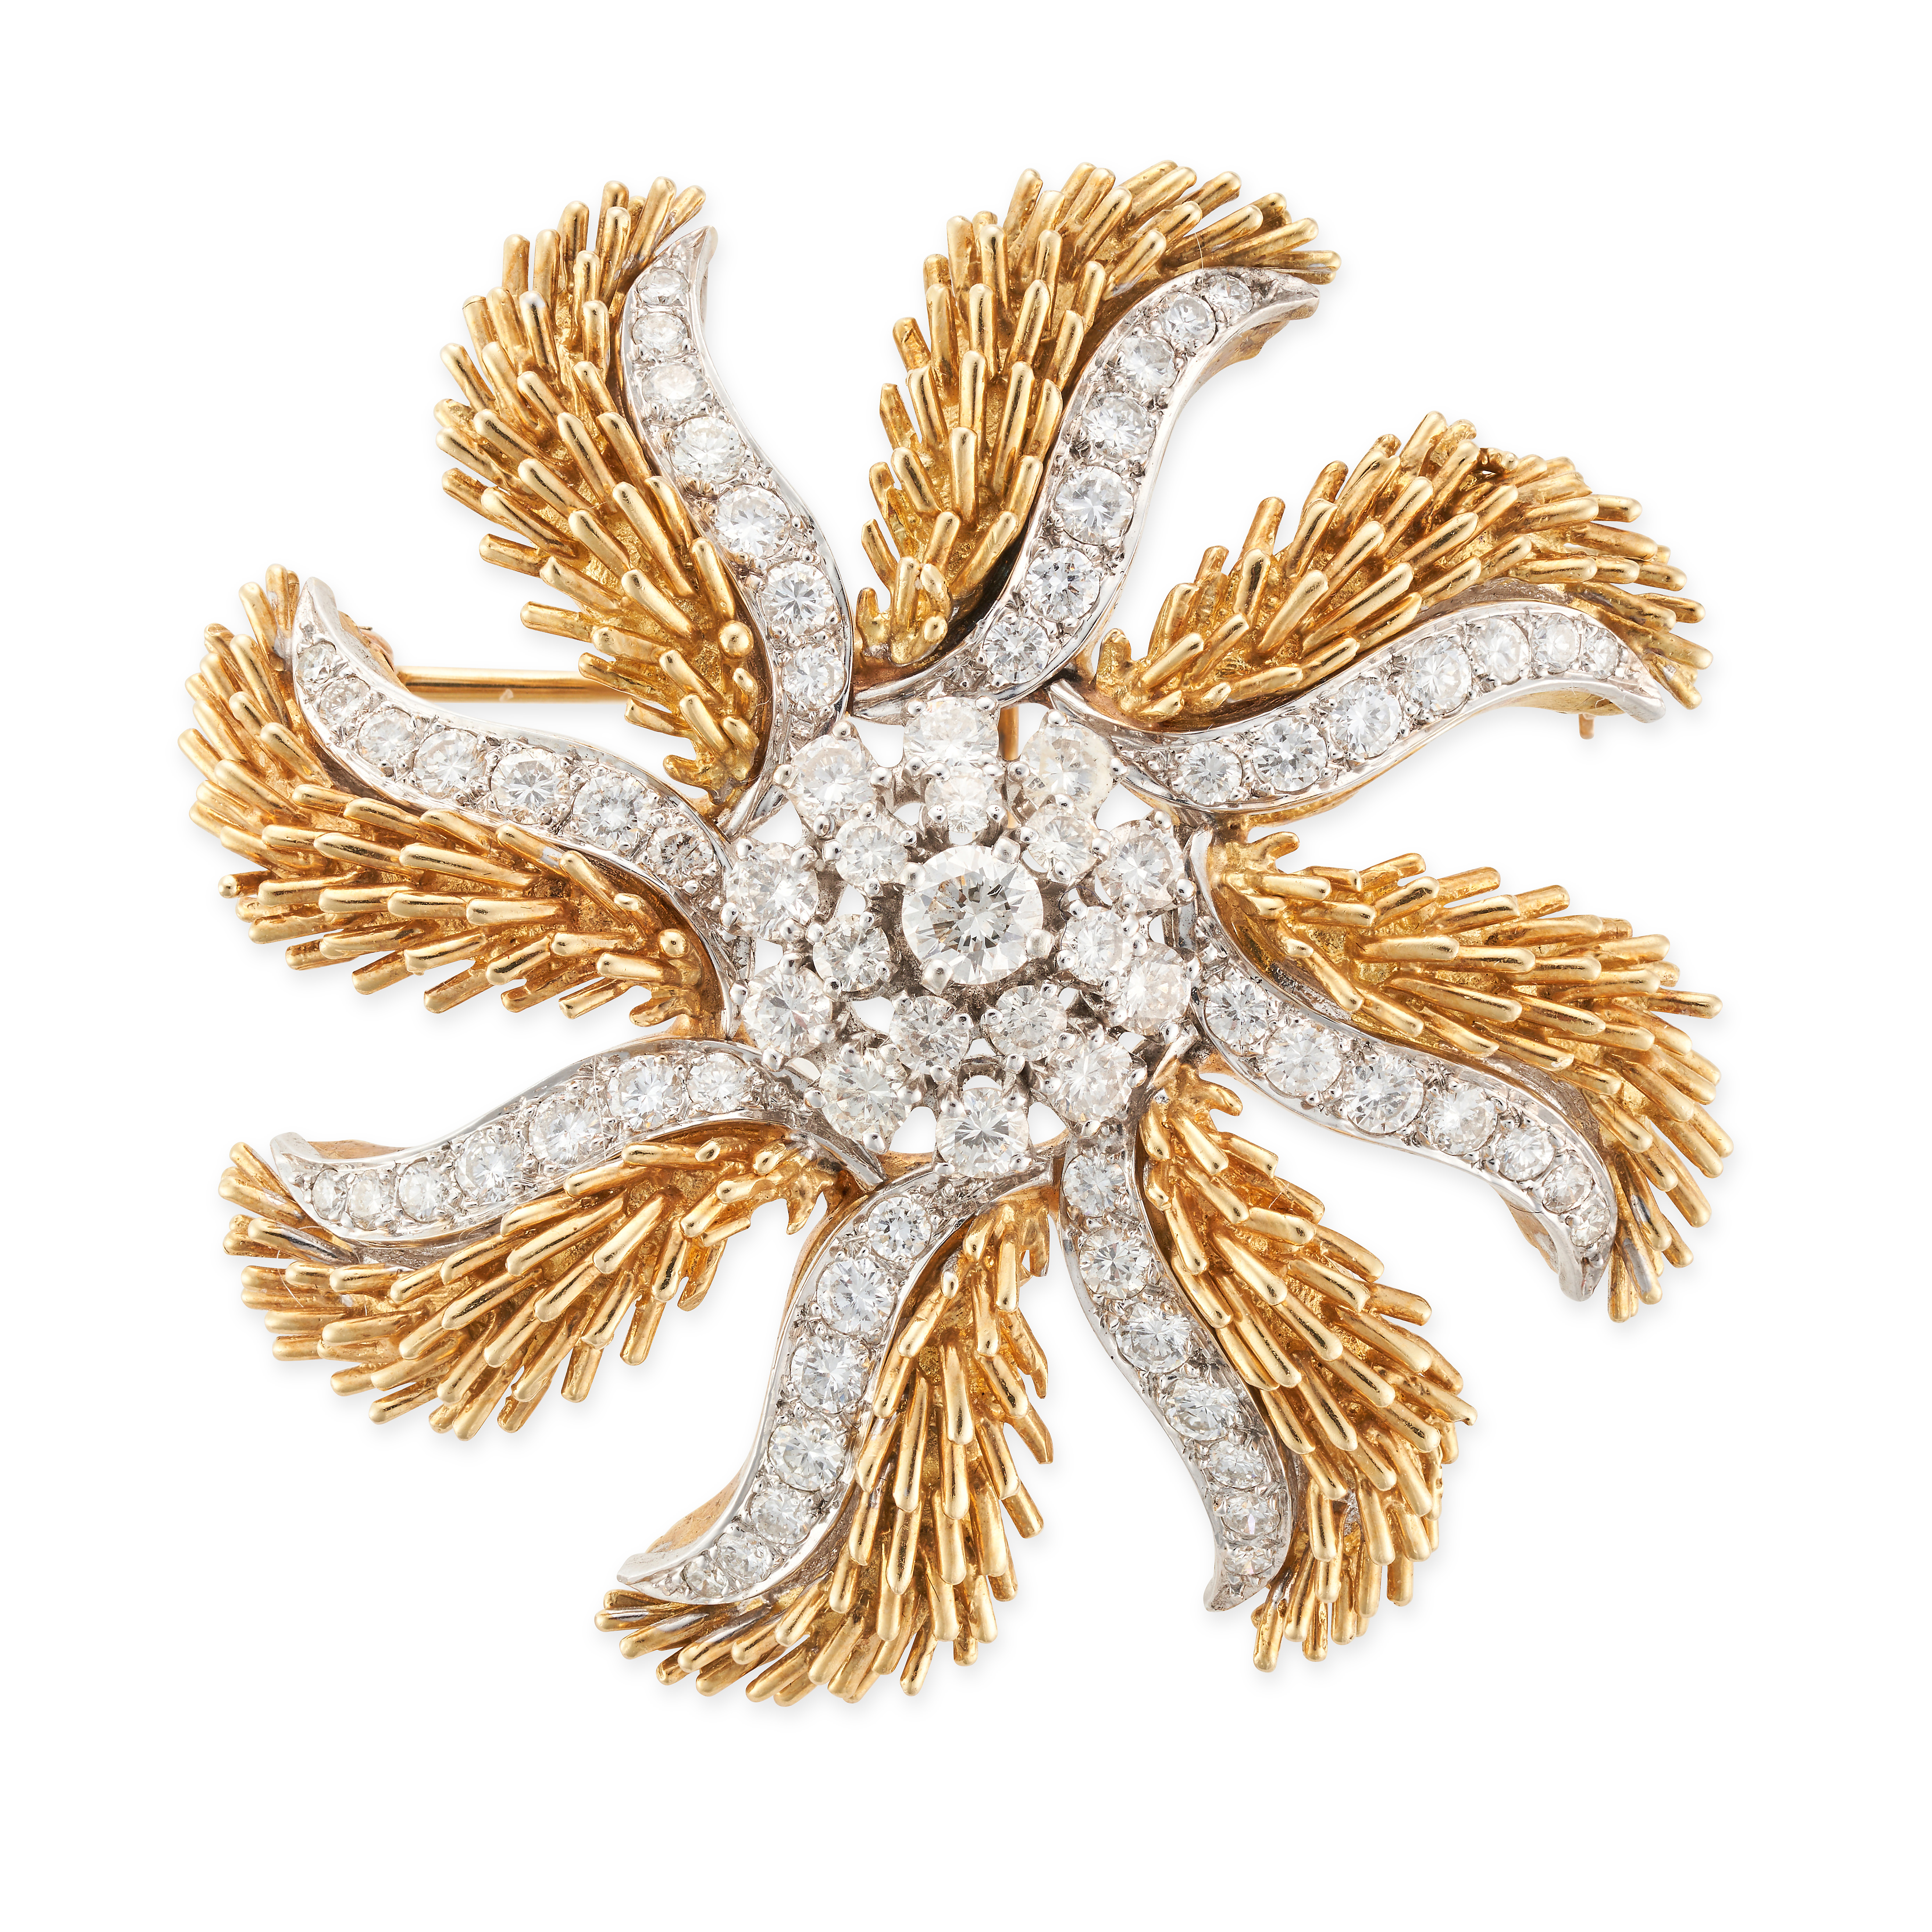 A VINTAGE DIAMOND STARBURST BROOCH / PENDANT in 18ct yellow gold, set to the centre with a cluste...